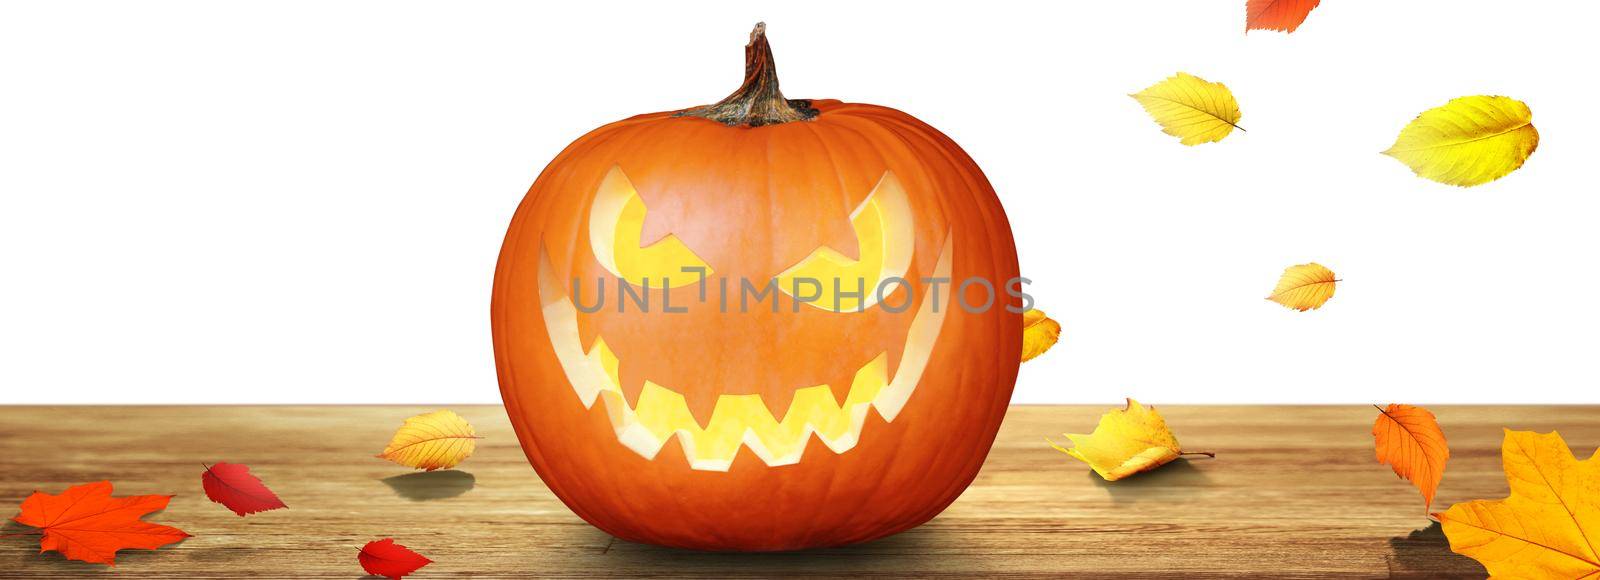 Scary Halloween pumpkin with eyes glowing inside on wooden background by Taut